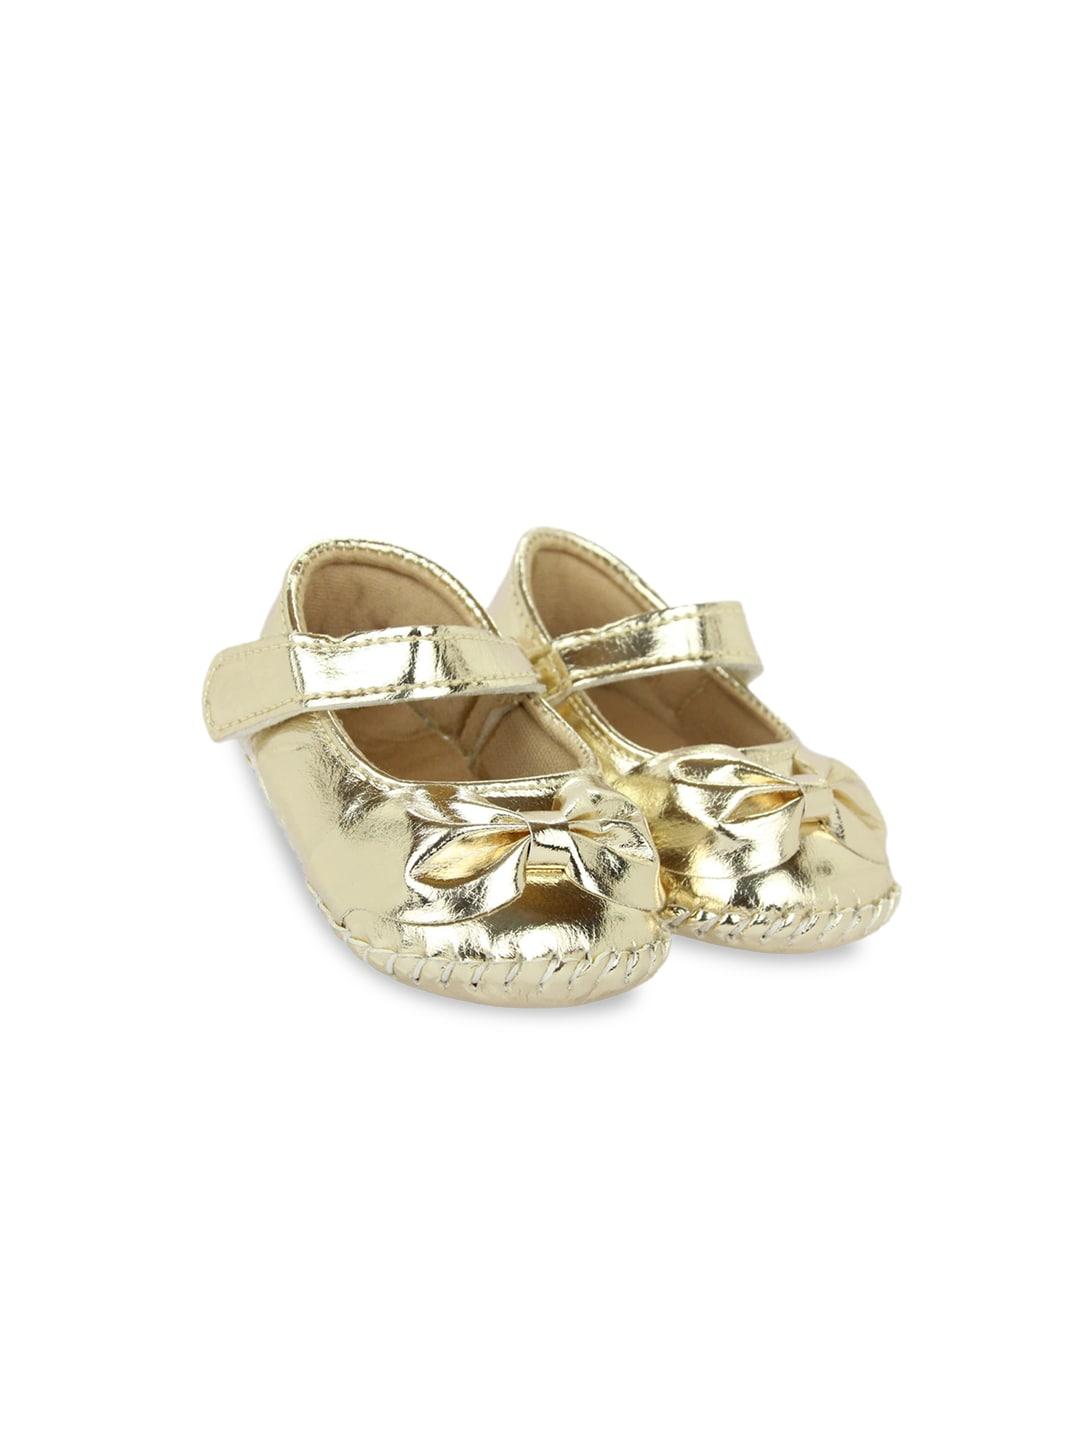 baesd infant girls bow embellished lightweight anti-slip booties